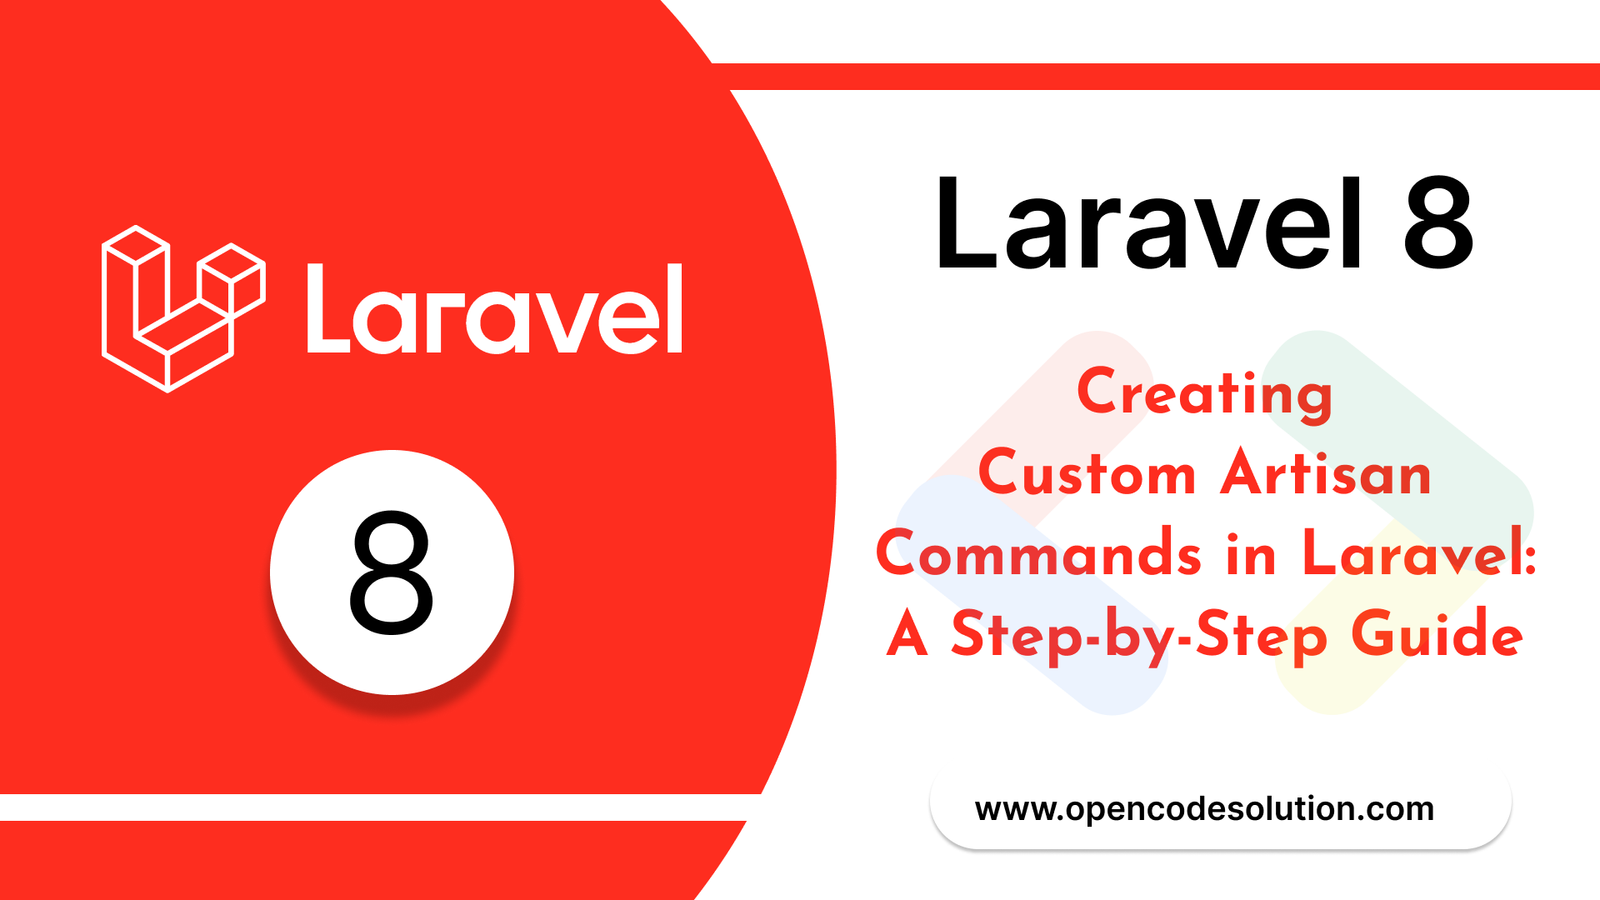 Creating Custom Artisan Commands in Laravel: A Step-by-Step Guide